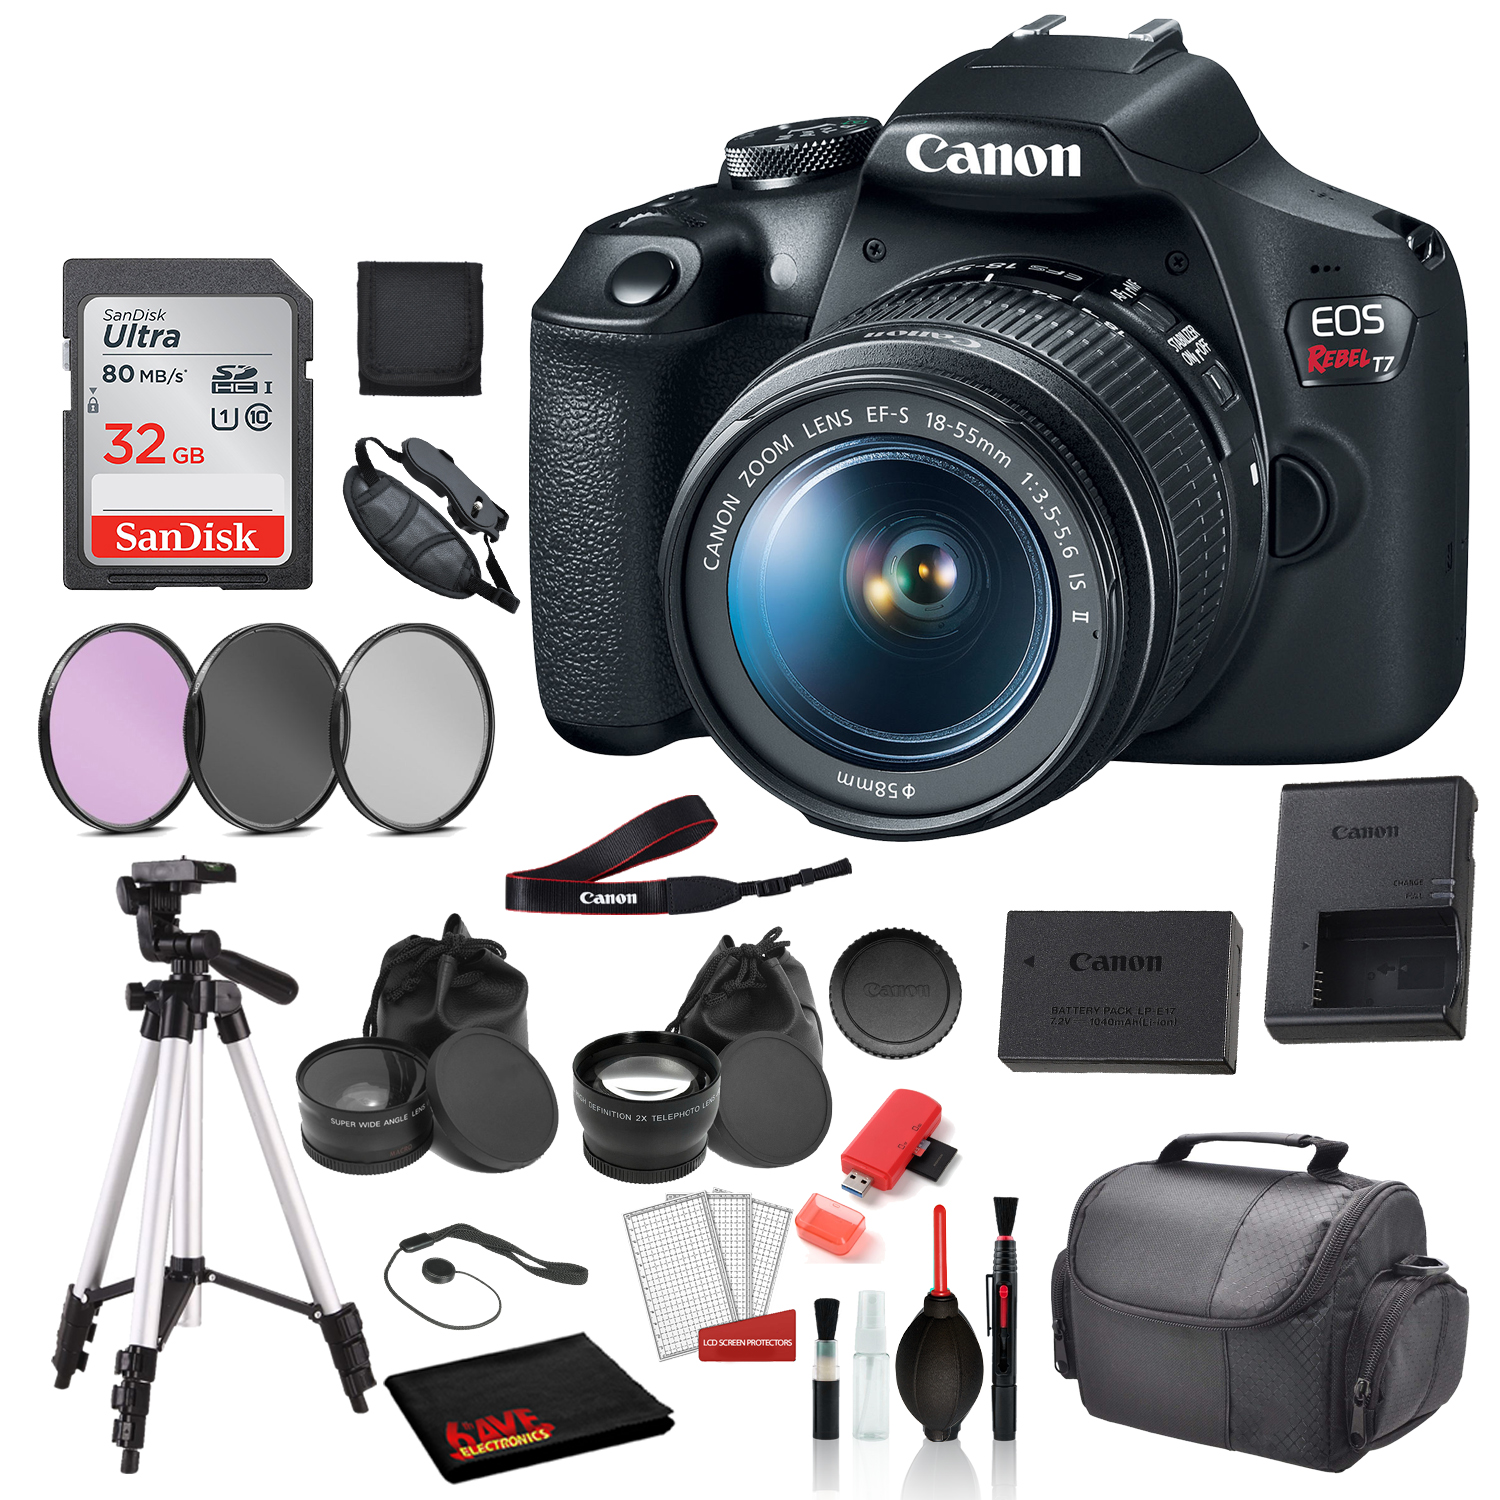 Canon EOS Rebel T7 Digital SLR Camera with 18-55mm Lens (2727C002) Professional package deal Bundle 'SanDisk 32gb SD Card + 3PC Filter Kit + 57' Tripod + MORE - image 1 of 5